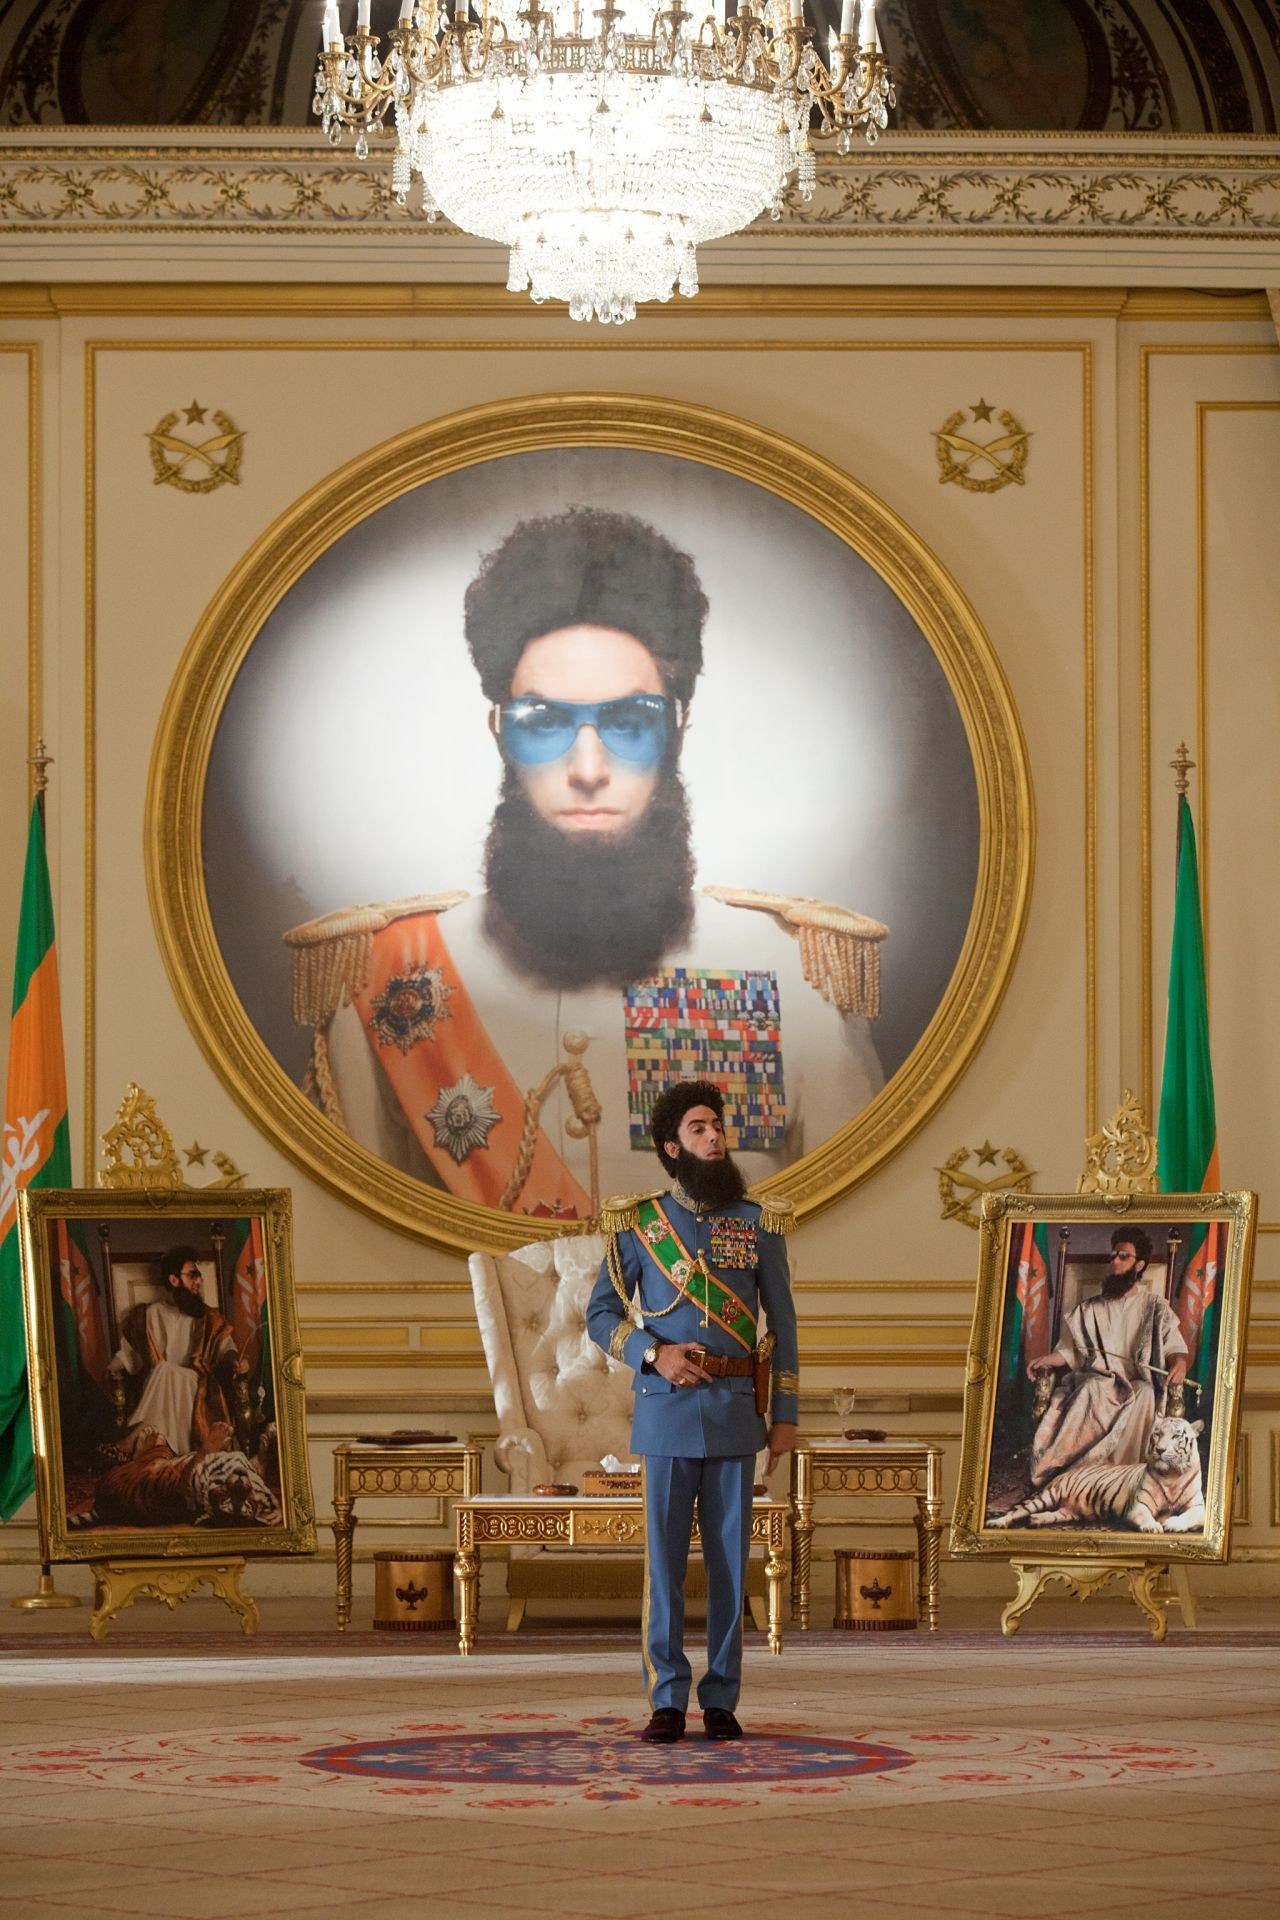 Sacha Baron Cohen stars as General Aladeen in Paramount Pictures' The Dictator (2012). Photo credit by Melinda Sue Gordon.